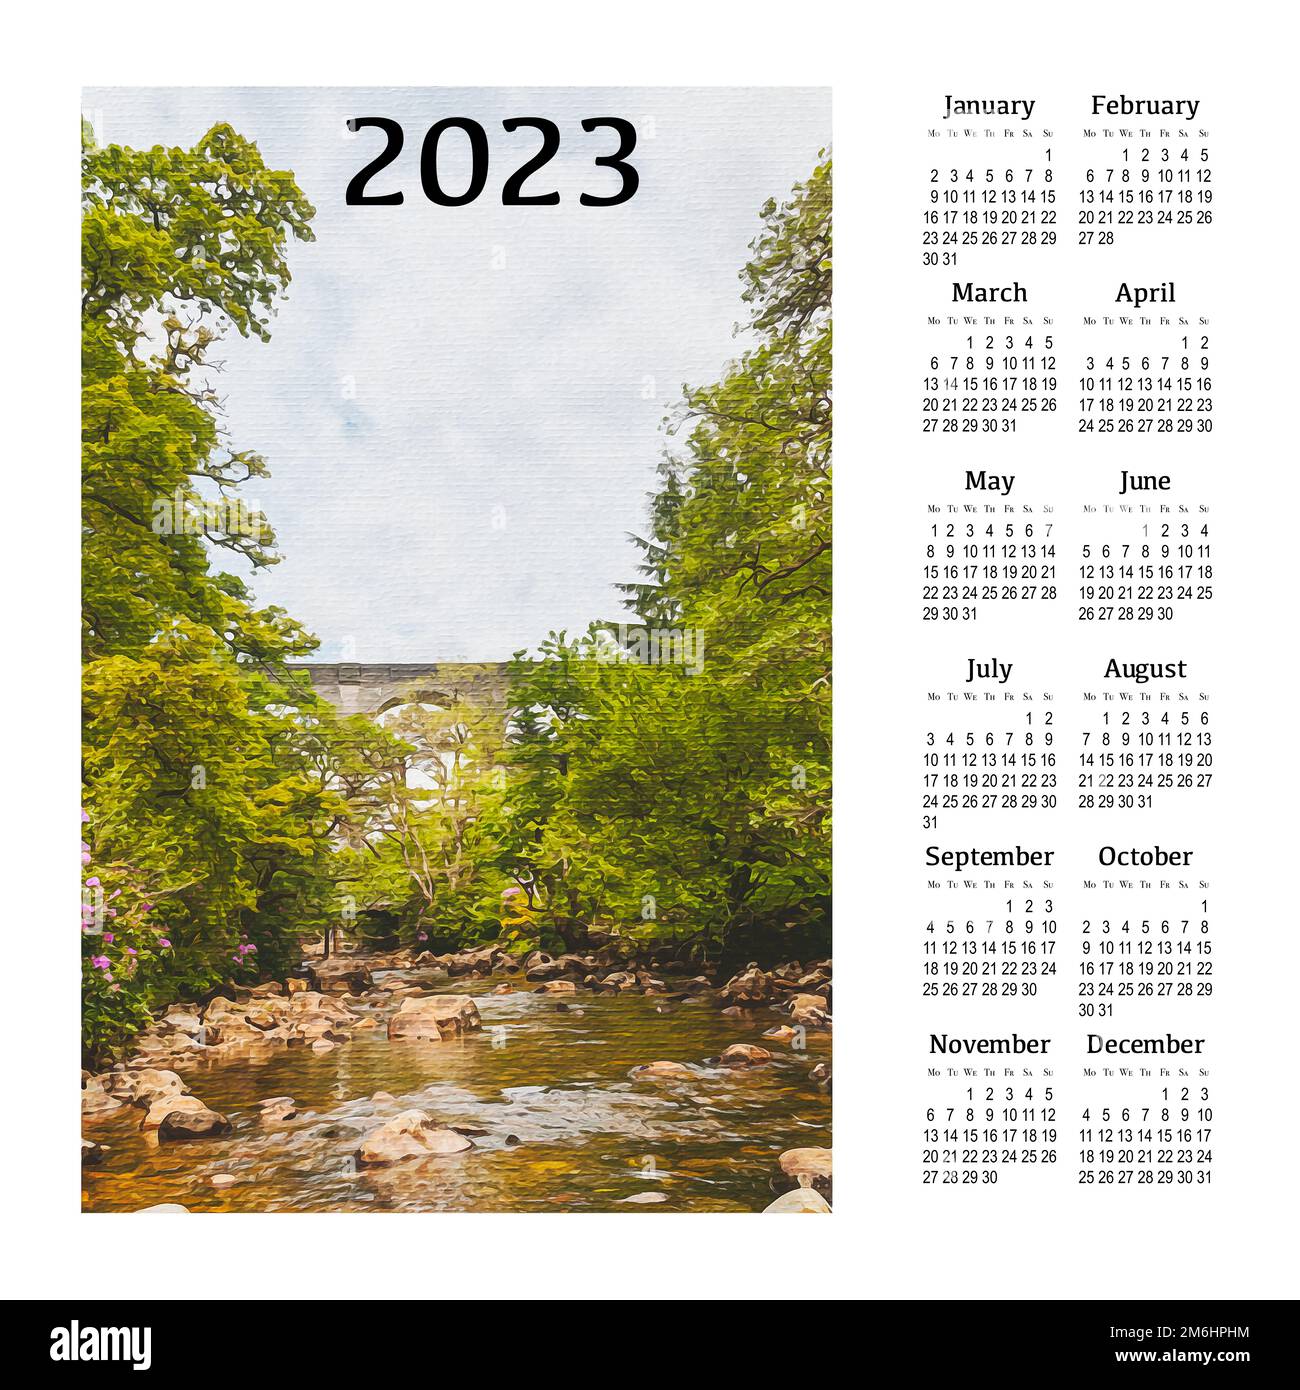 Calendar for 2023 on a white background for printing. Scotland, Great Britain. Stock Photo